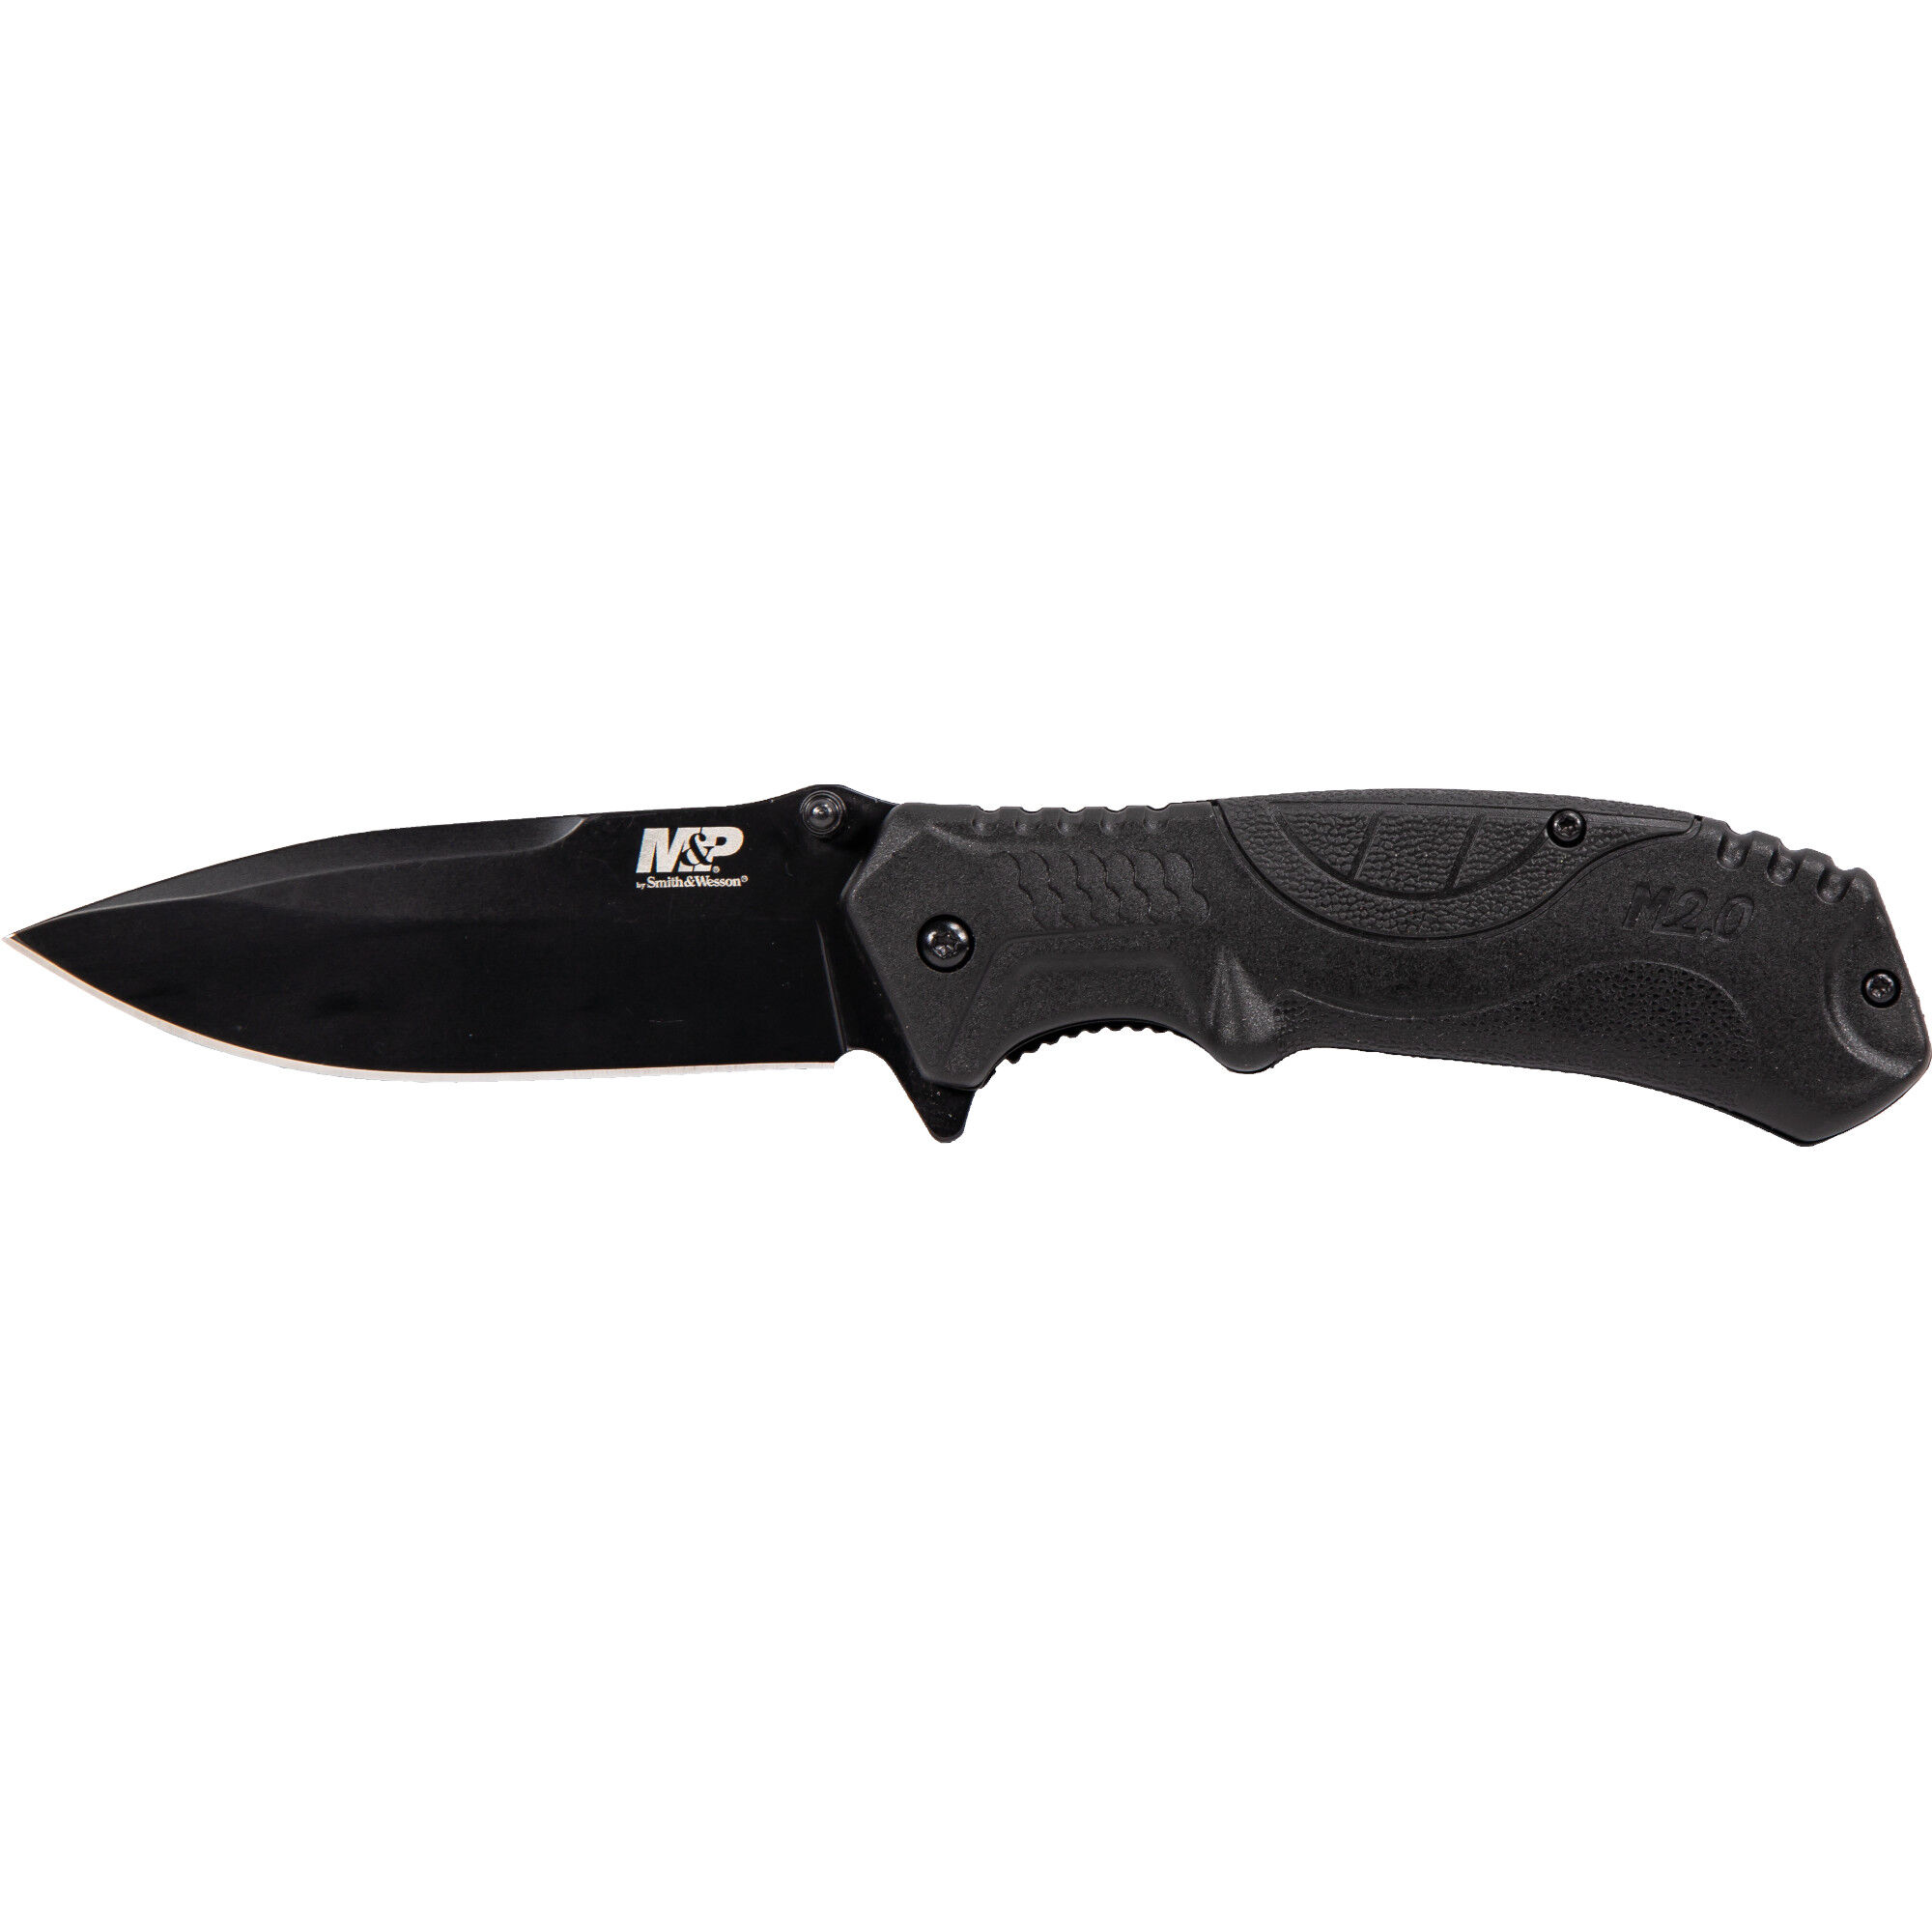 smith and.wesson magic droppoint knives